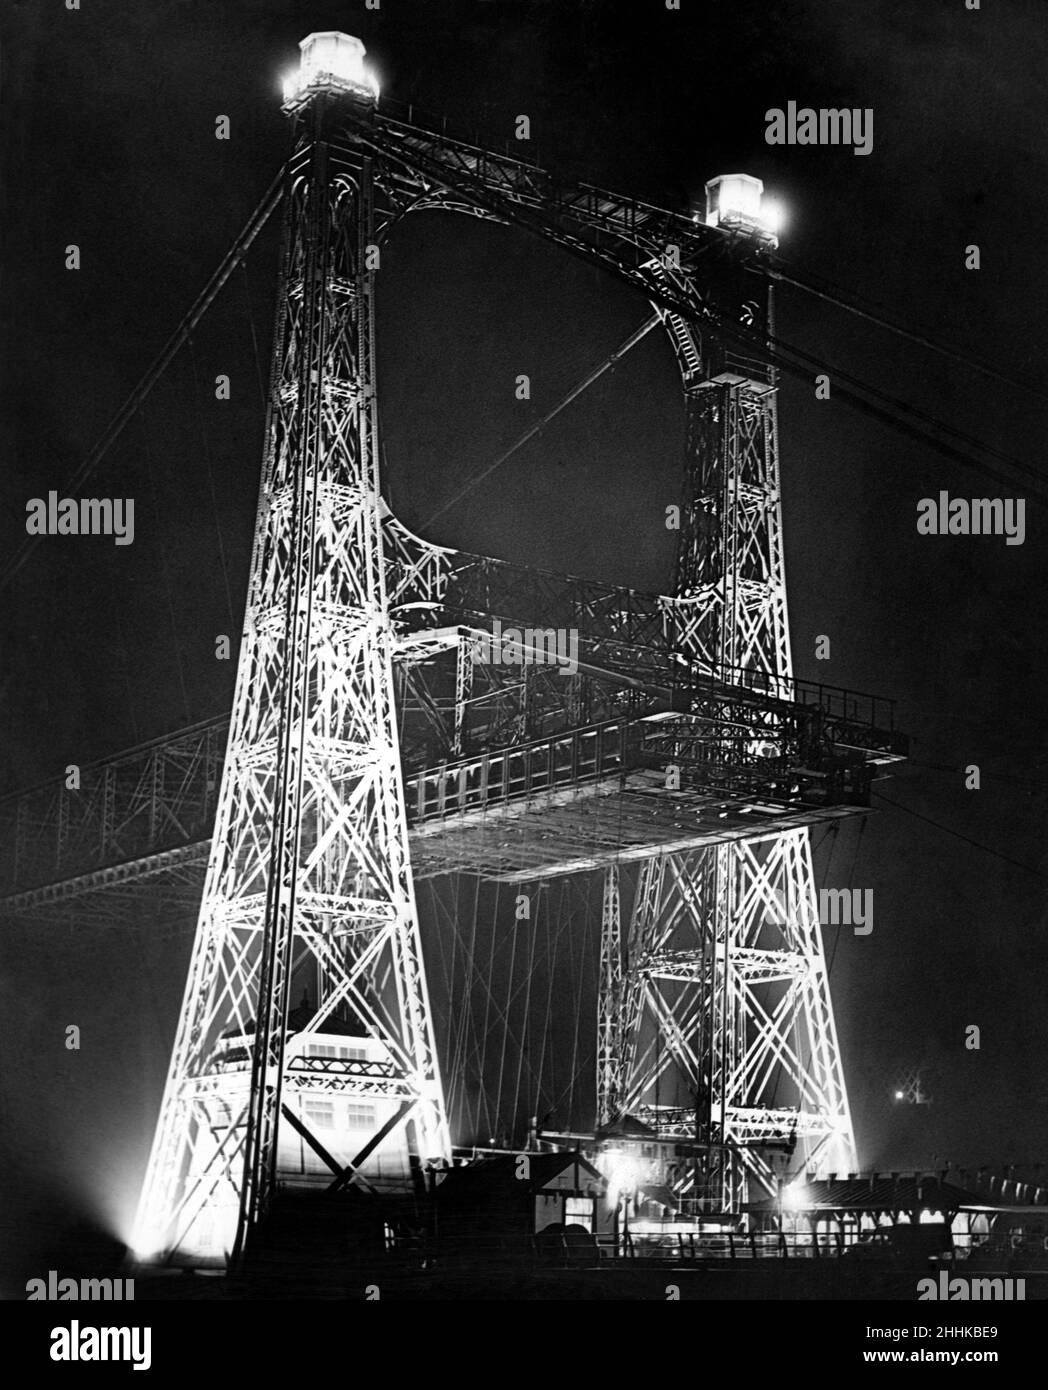 The Widnes-Runcorn Transporter Bridge, by floodlight, which links Widnes and Runcorn. It was lit by floodlight as part of the celebrations for the silver jubilee of King George V. May 1935. Stock Photo